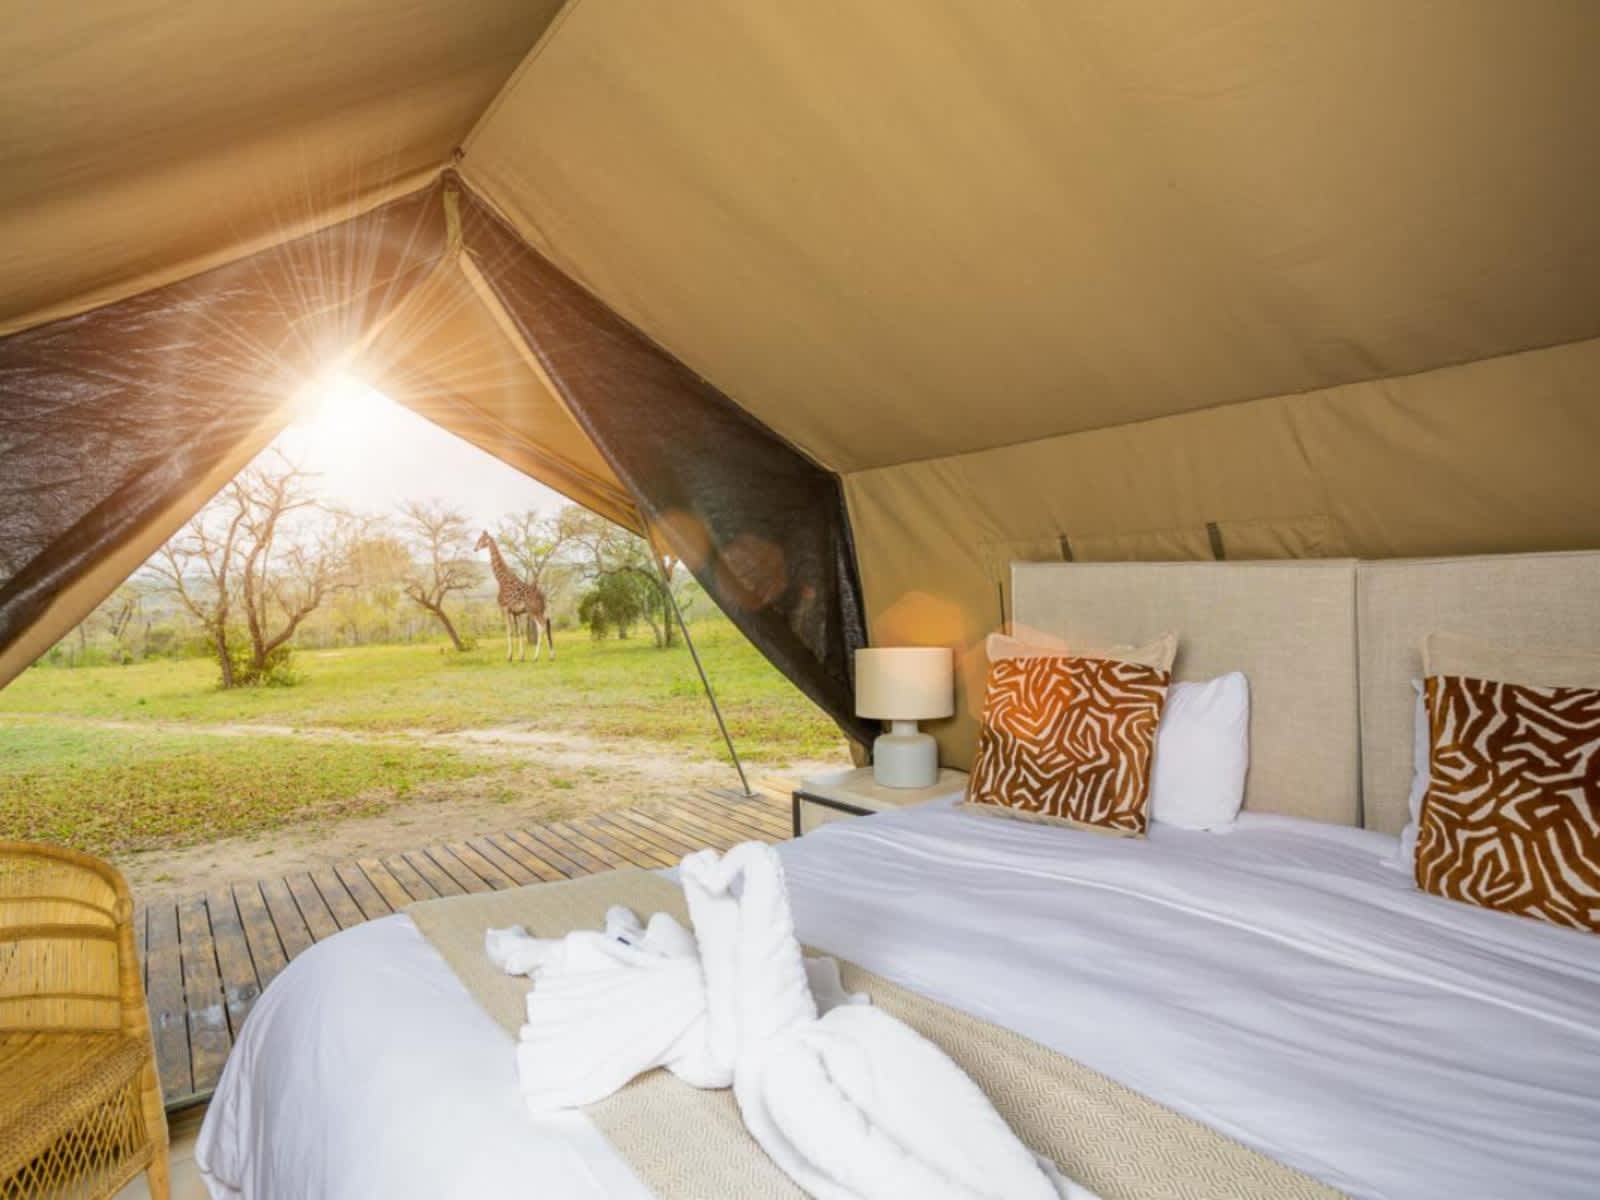 Unyati Safari Lodge, 30 minutes drive from Kruger National Park- Chalet /Tented Stays for 2 + Breakfast + Dinner Daily from R2 499 per Night!